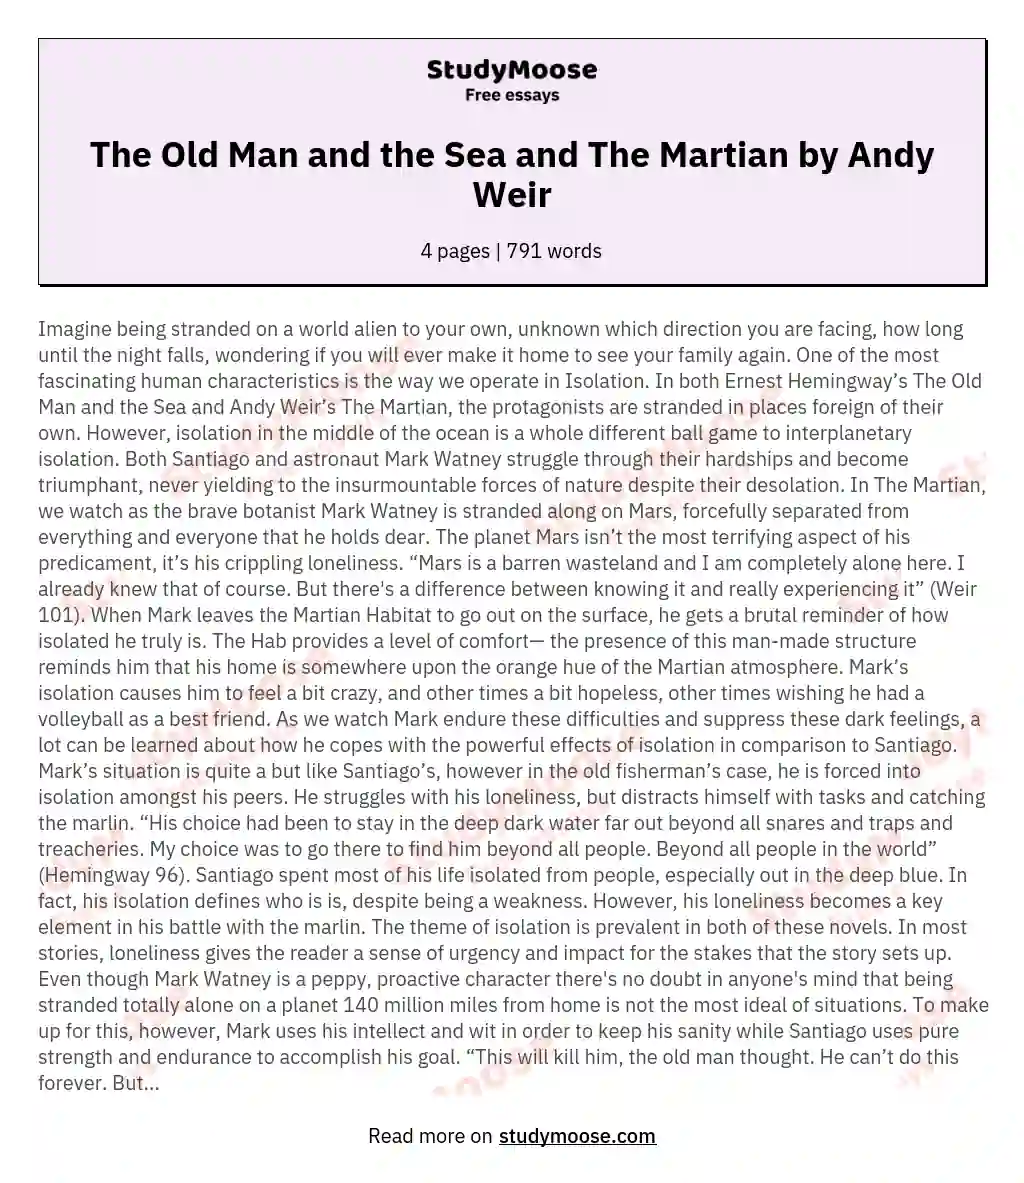 The Old Man and the Sea and The Martian by Andy Weir